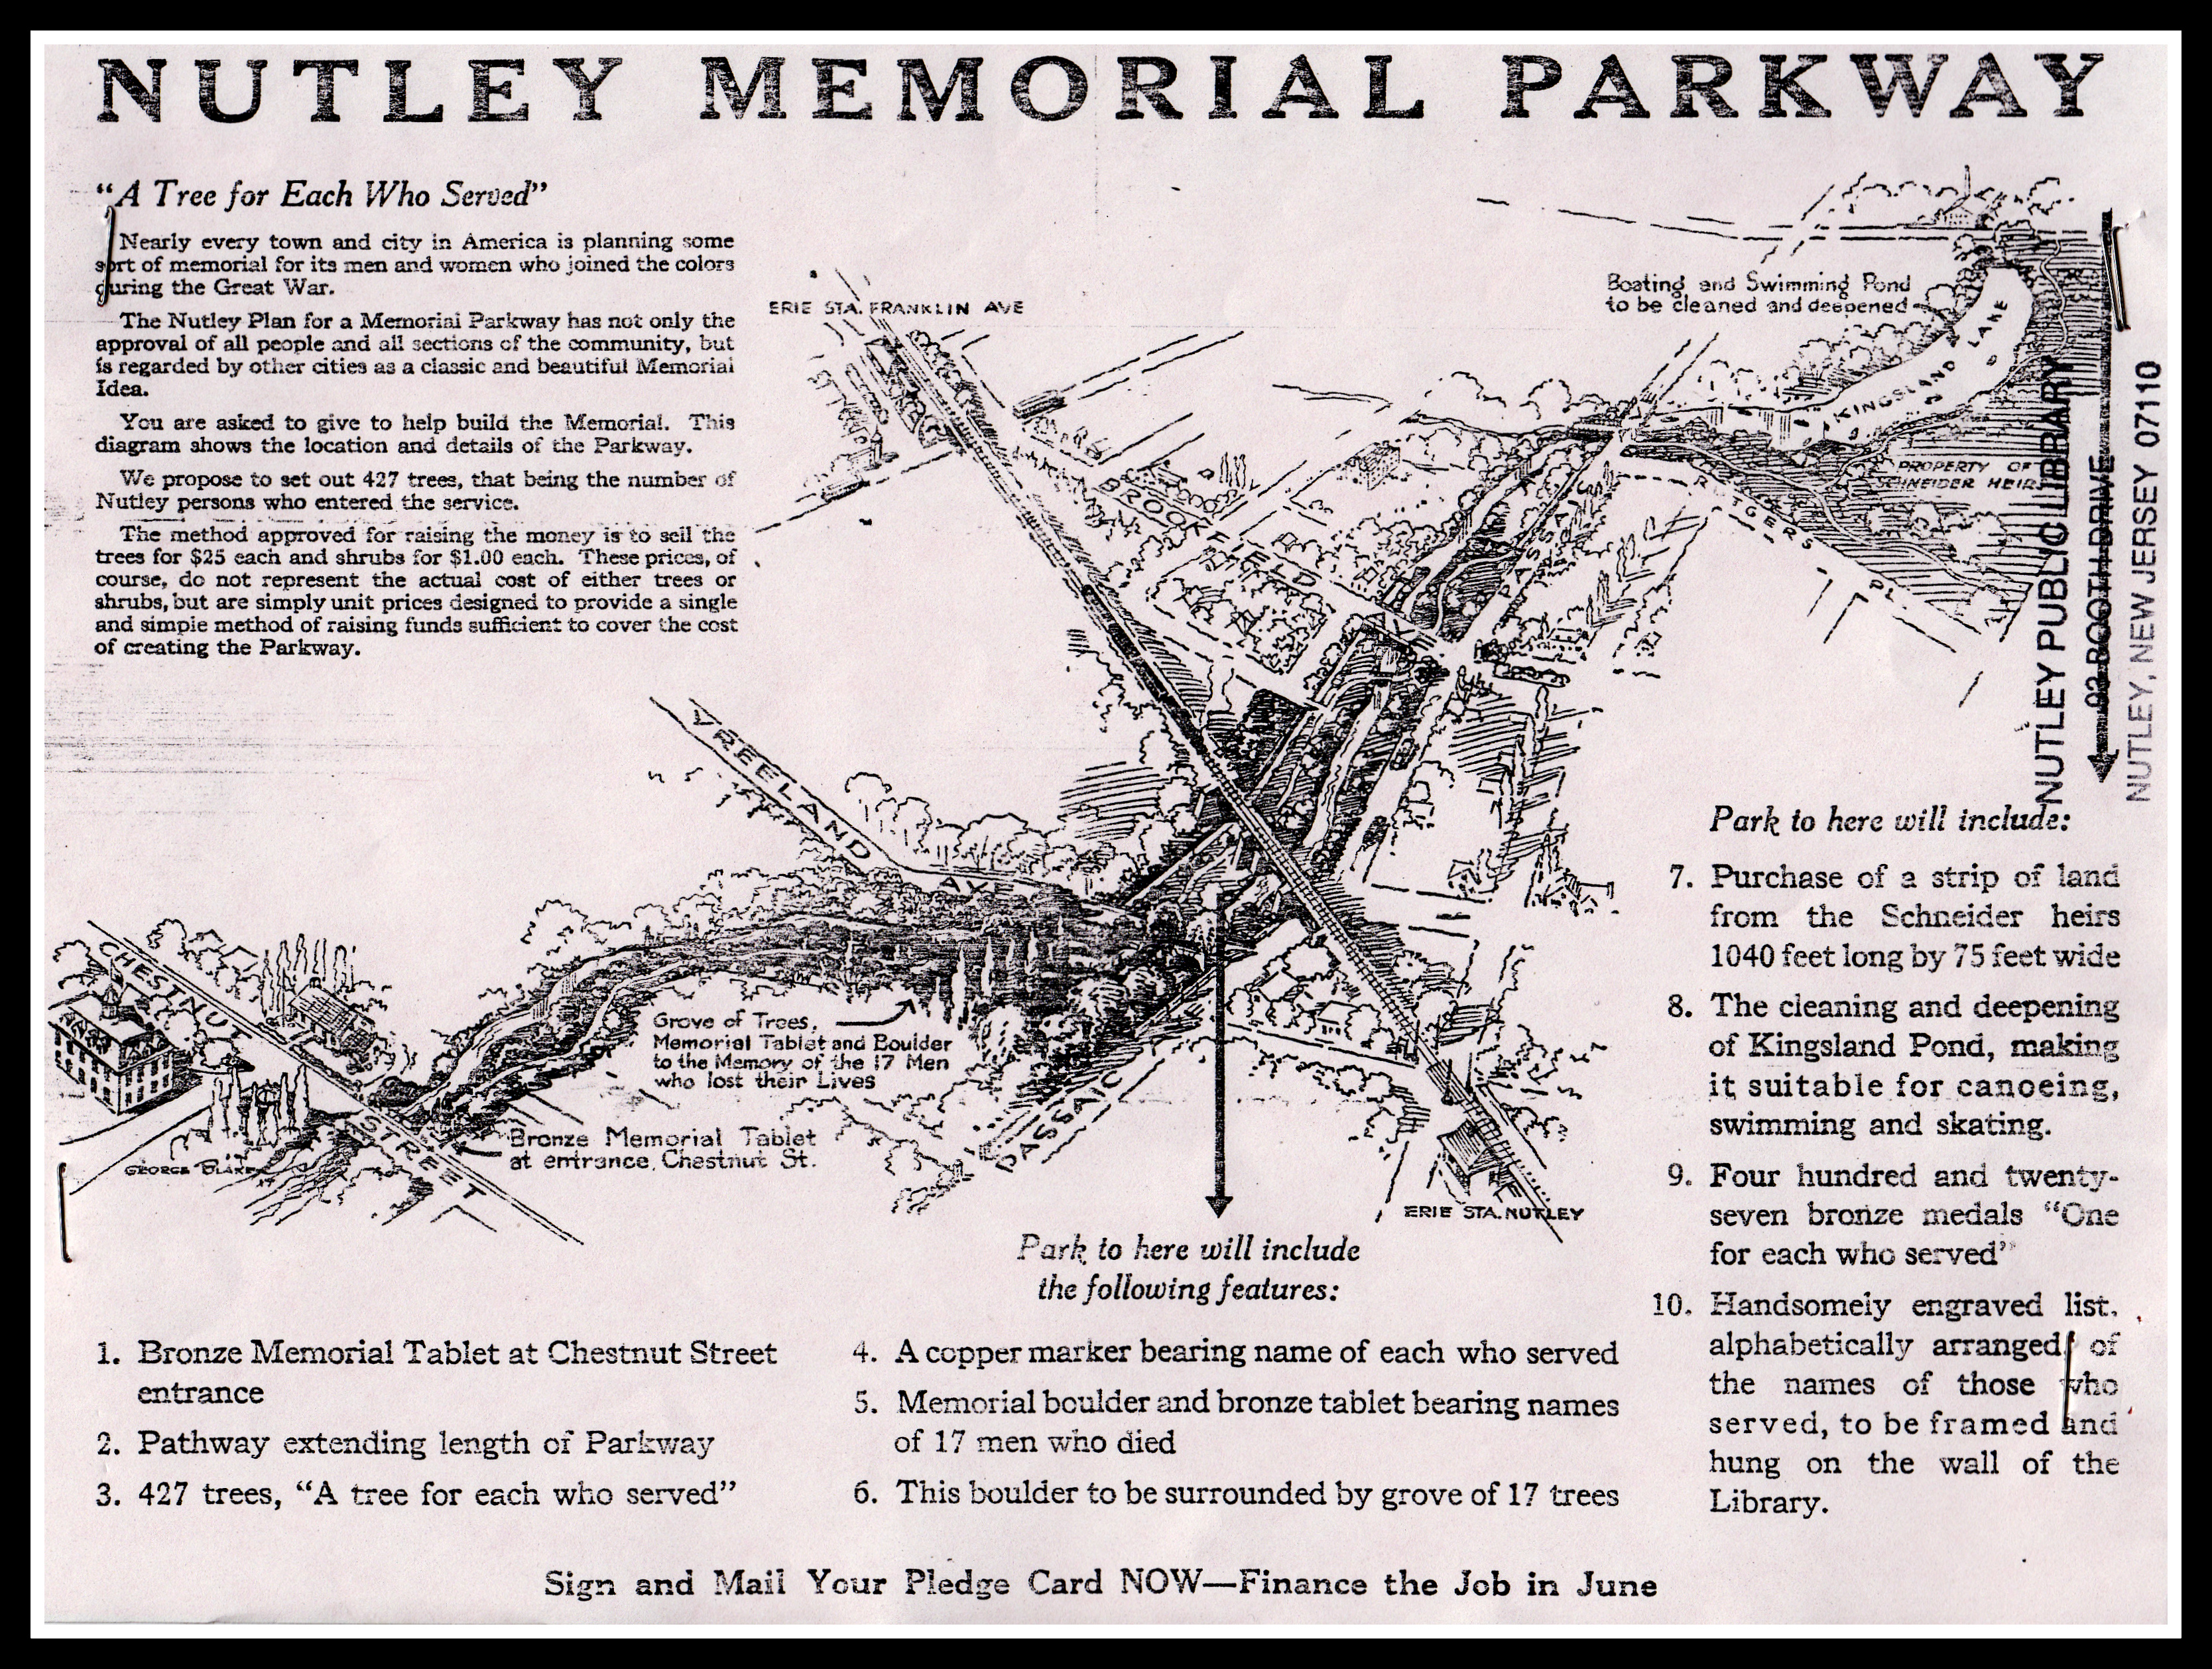 WW1 Memorial Park, committee plans, Nutley NJ - Libray archive